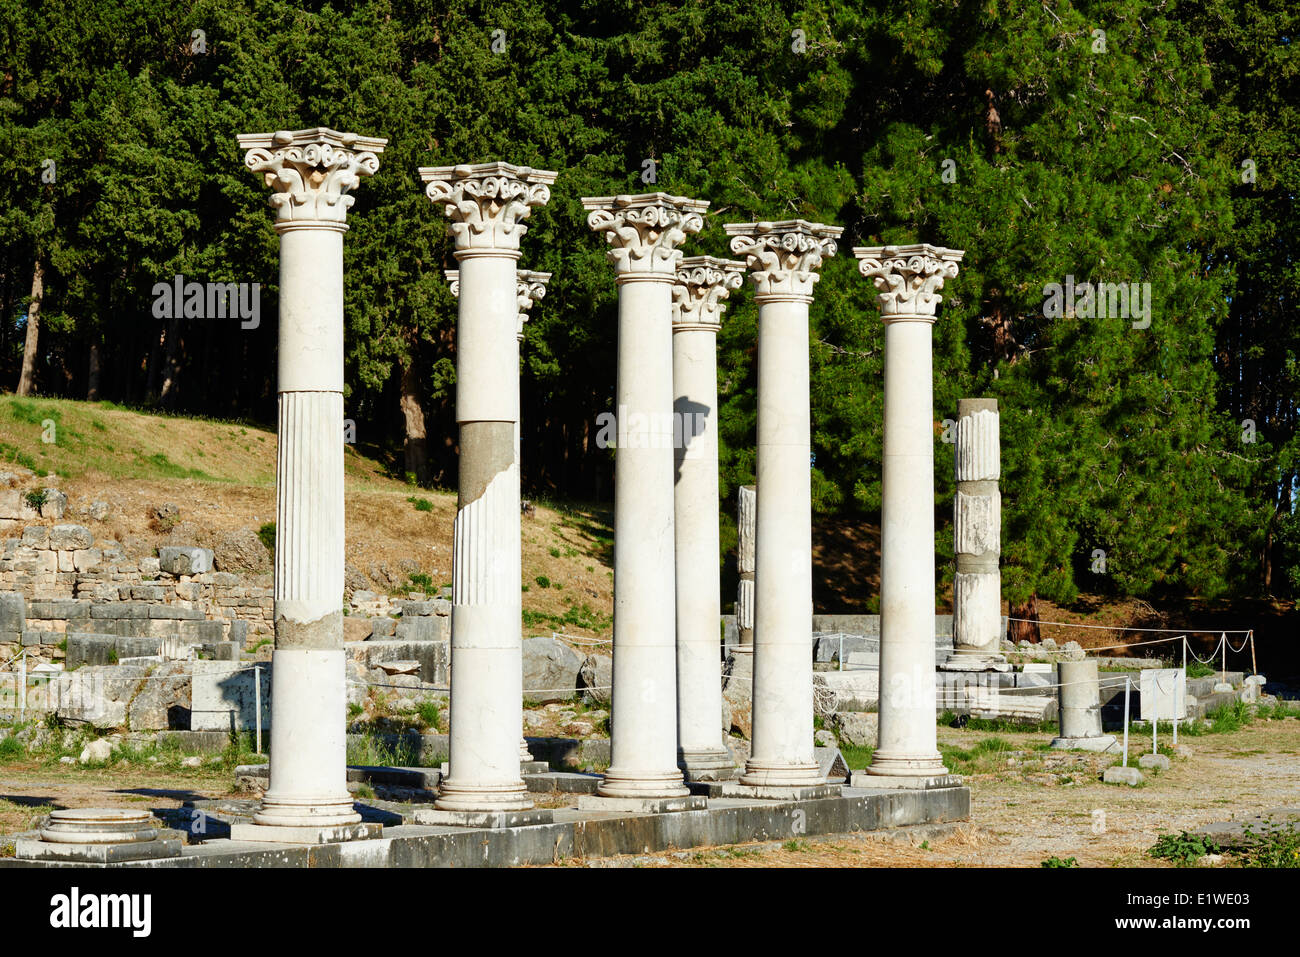 Greece, Dodecanese, Kos island, Columns in the Ancient Greek city of Asklepieion Stock Photo